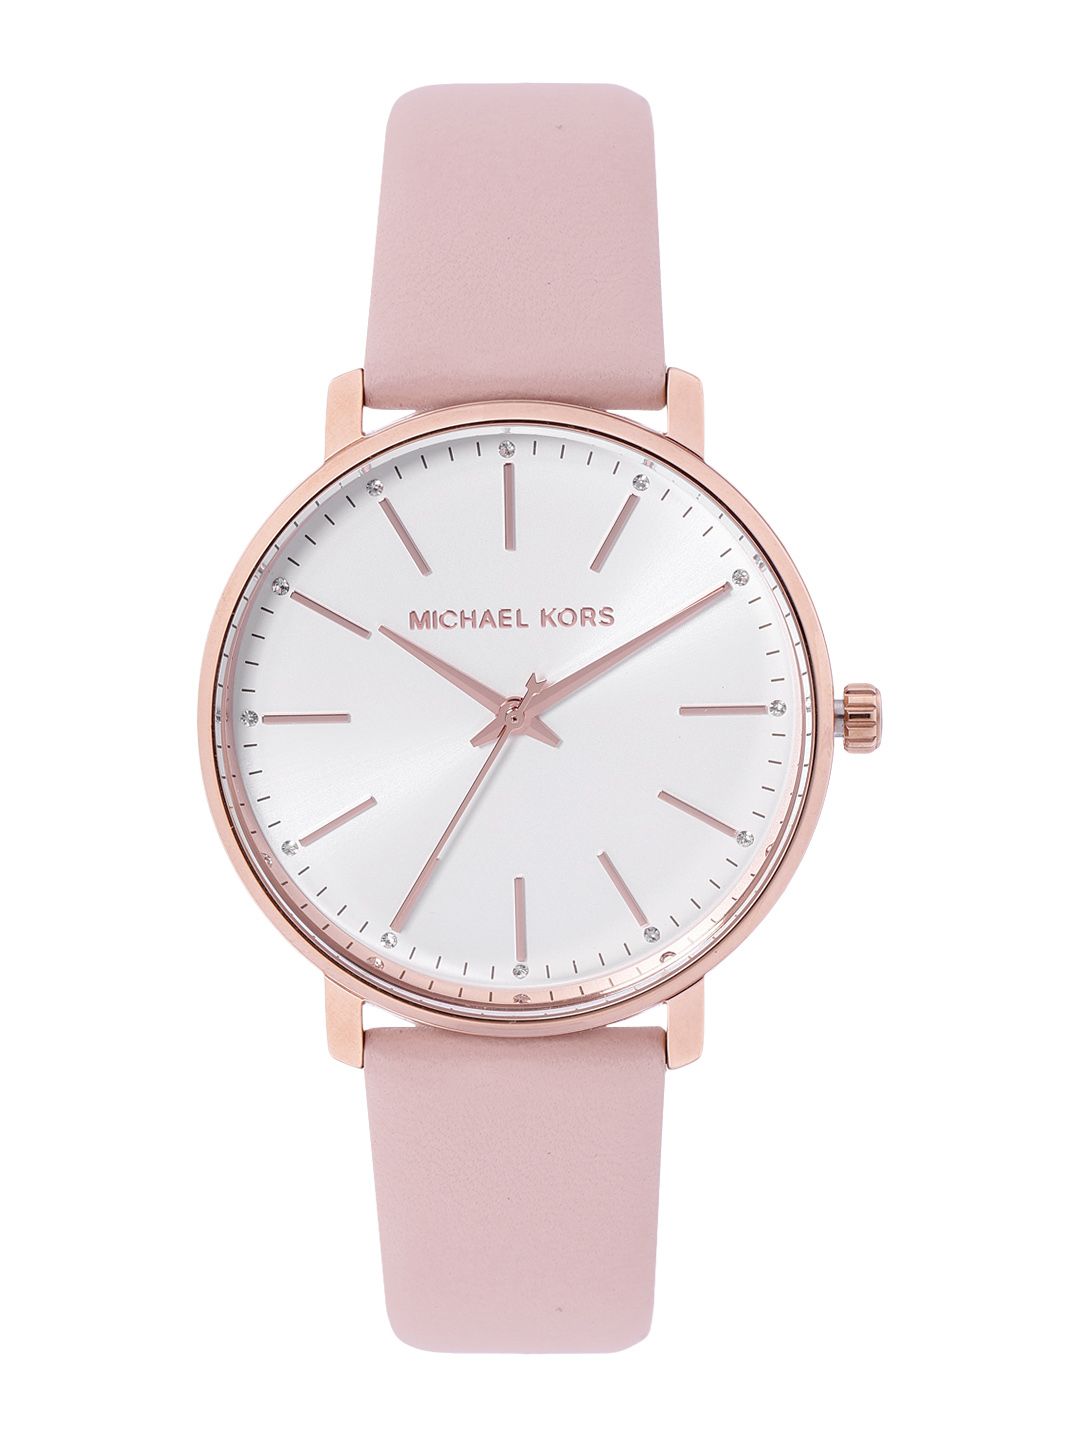 Michael Kors Women White Dial & Pink Leather Straps Analogue Watch MK2741 Price in India